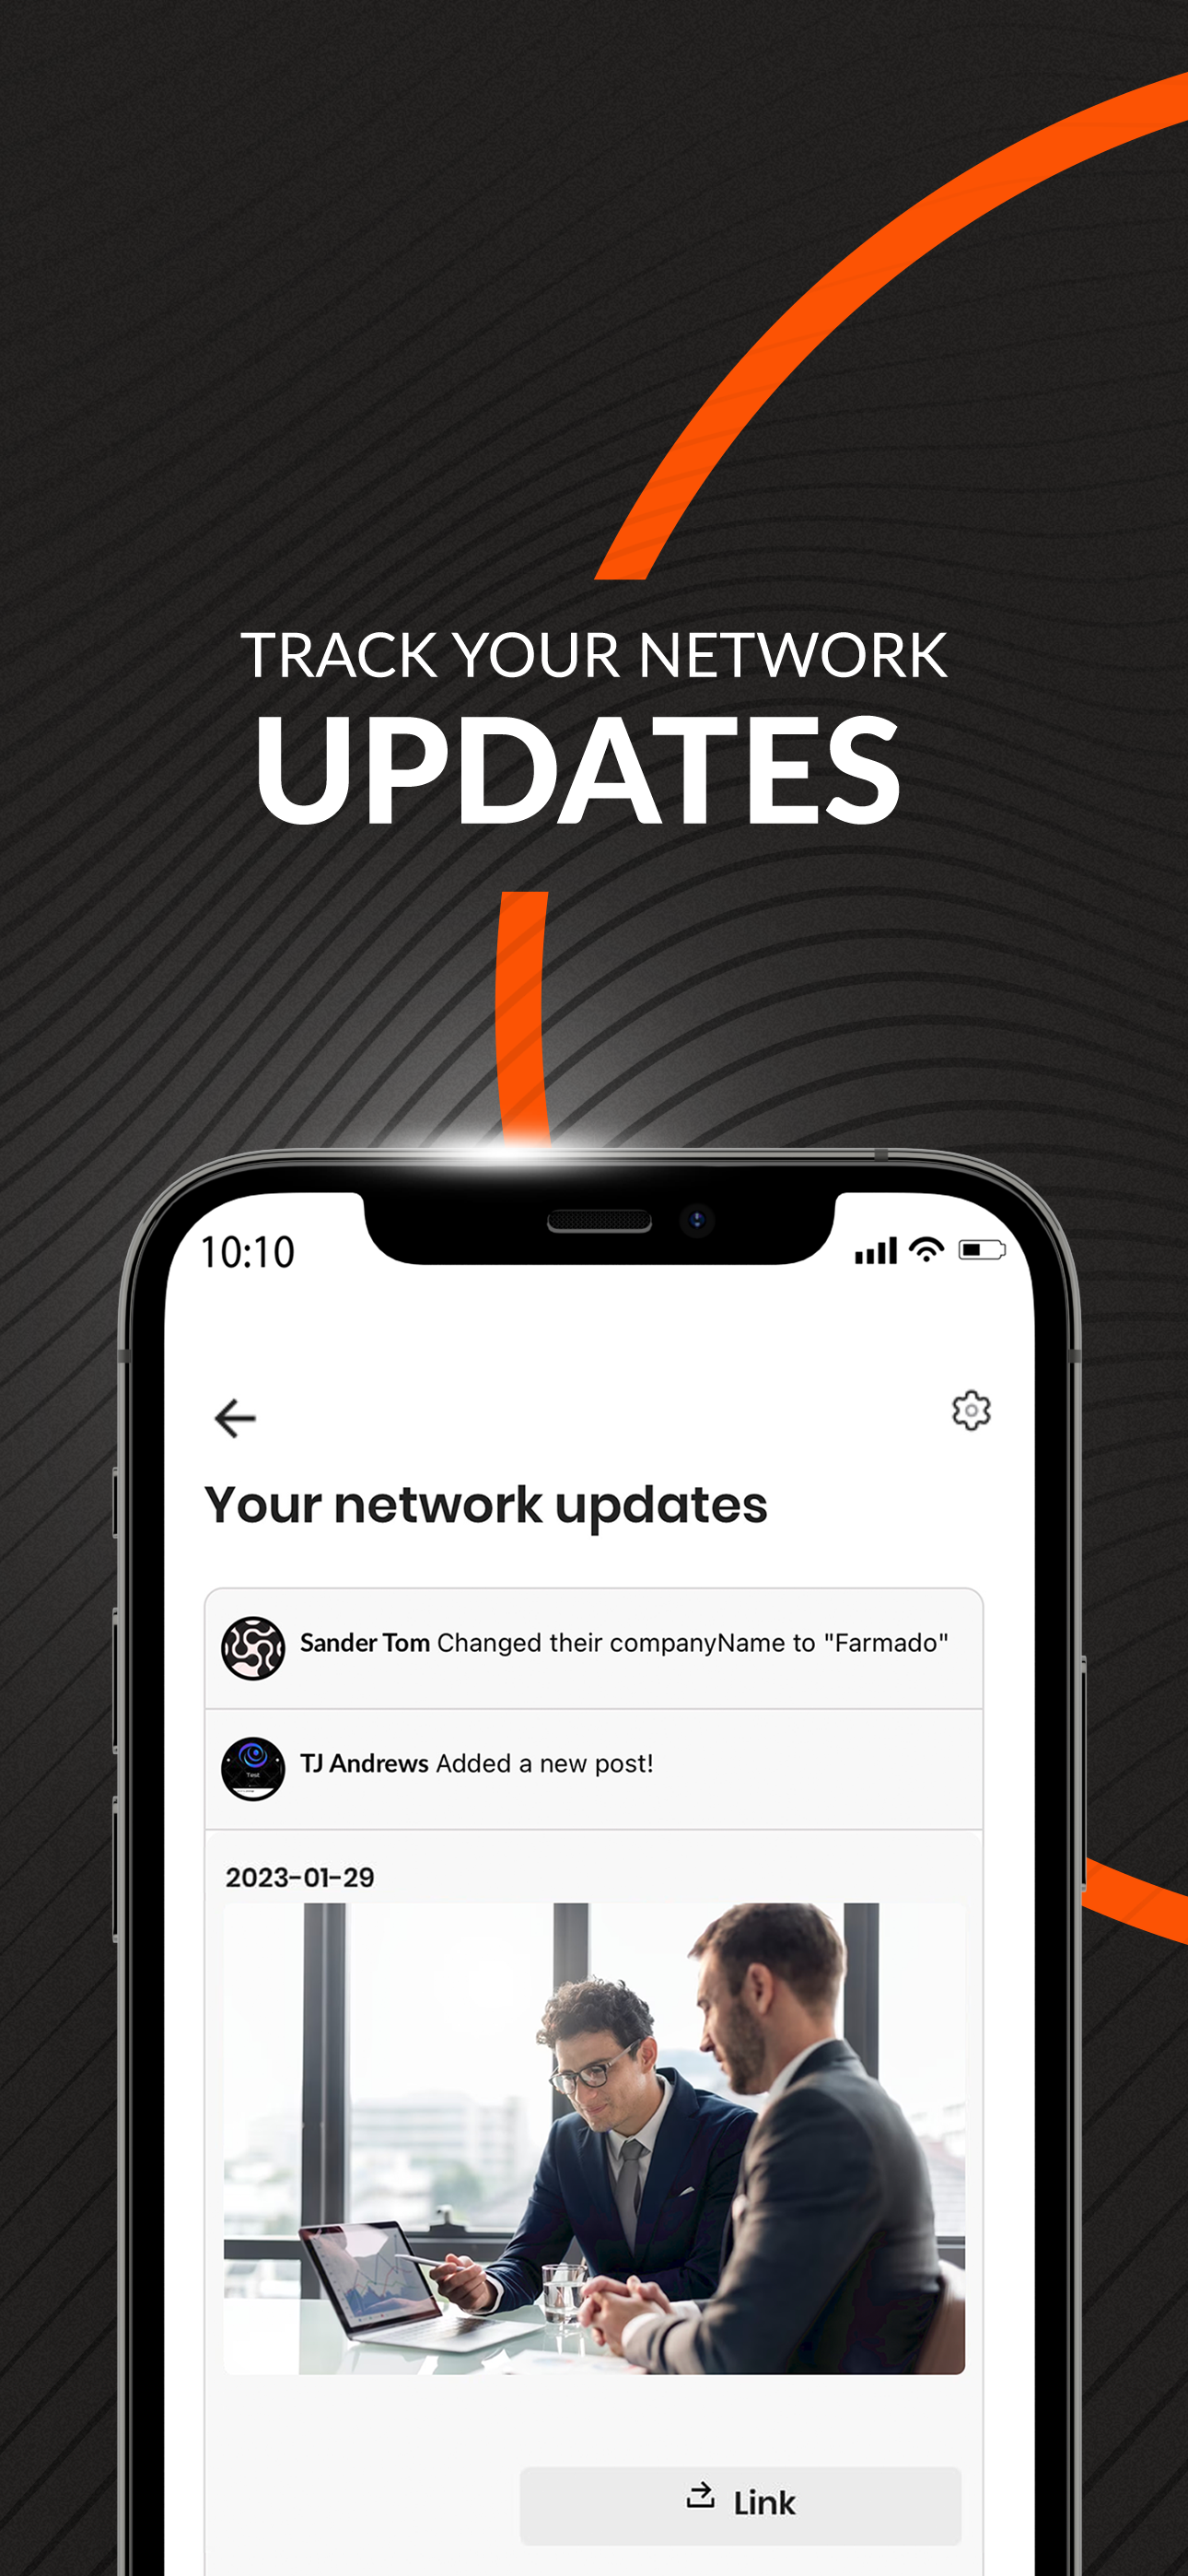 Track your network updates